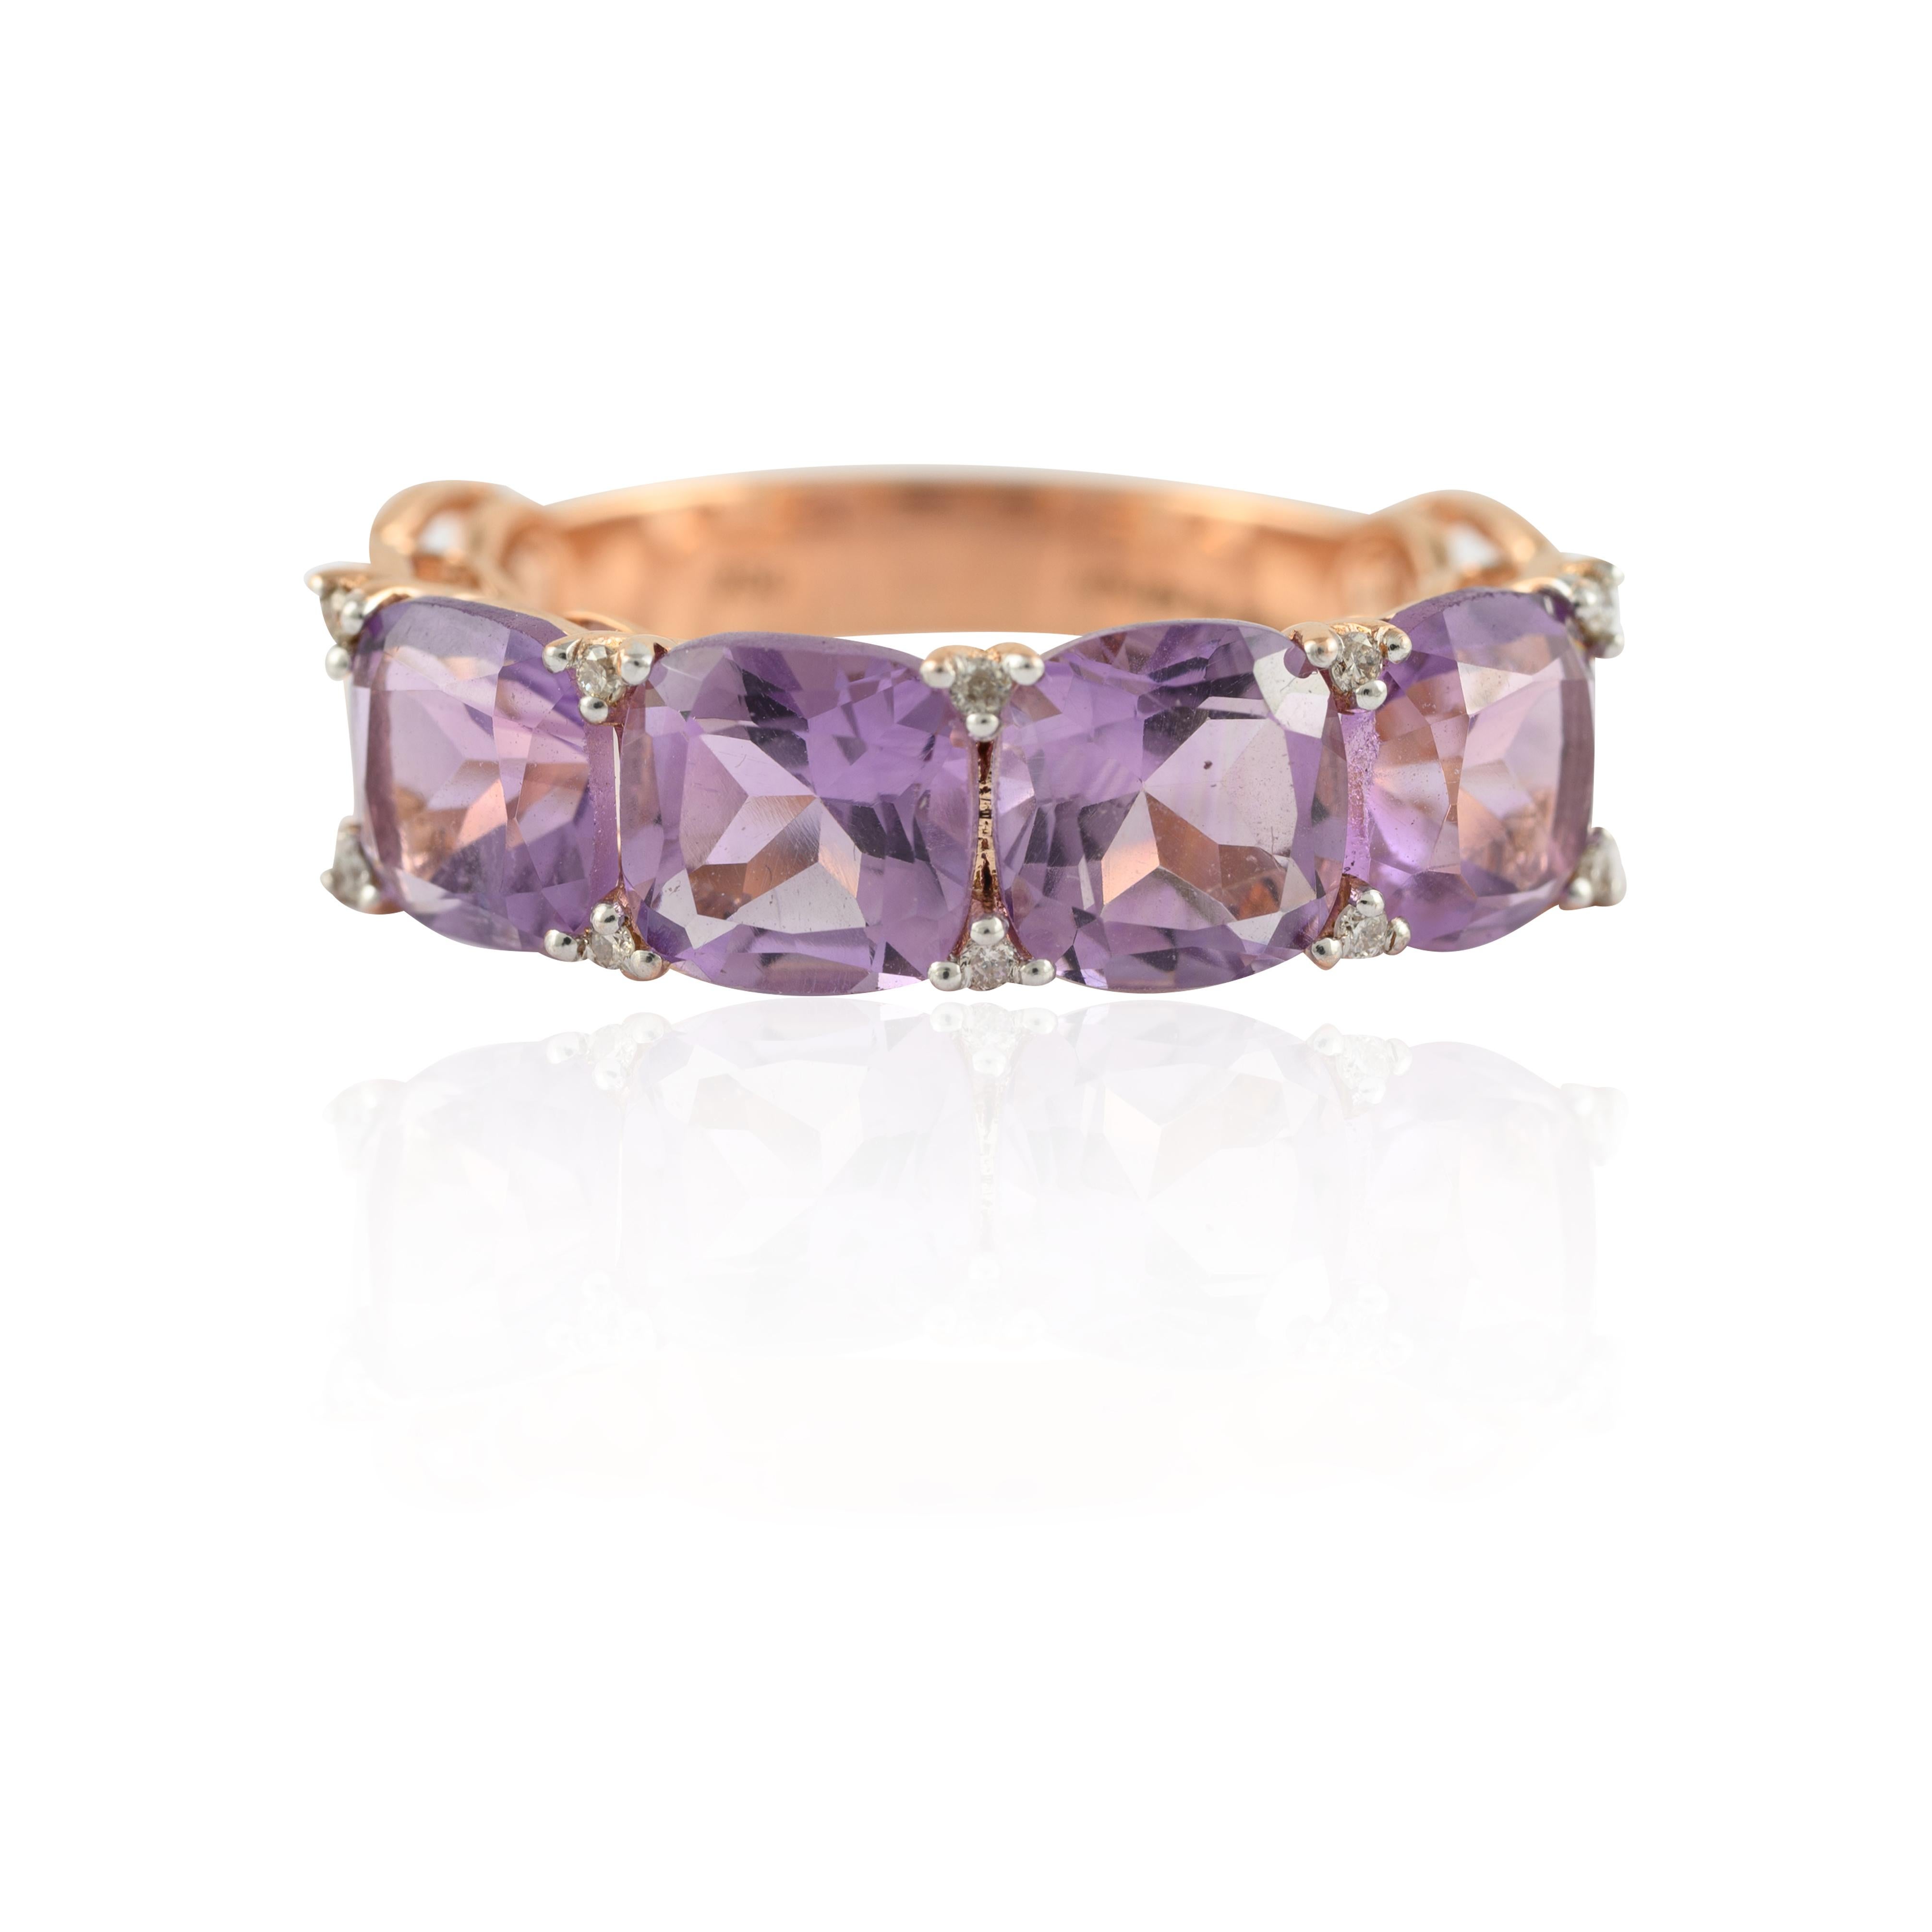 For Sale:  2.92 Carat Cushion Amethyst & Diamond Half Band Ring in 18k Solid Rose Gold 3